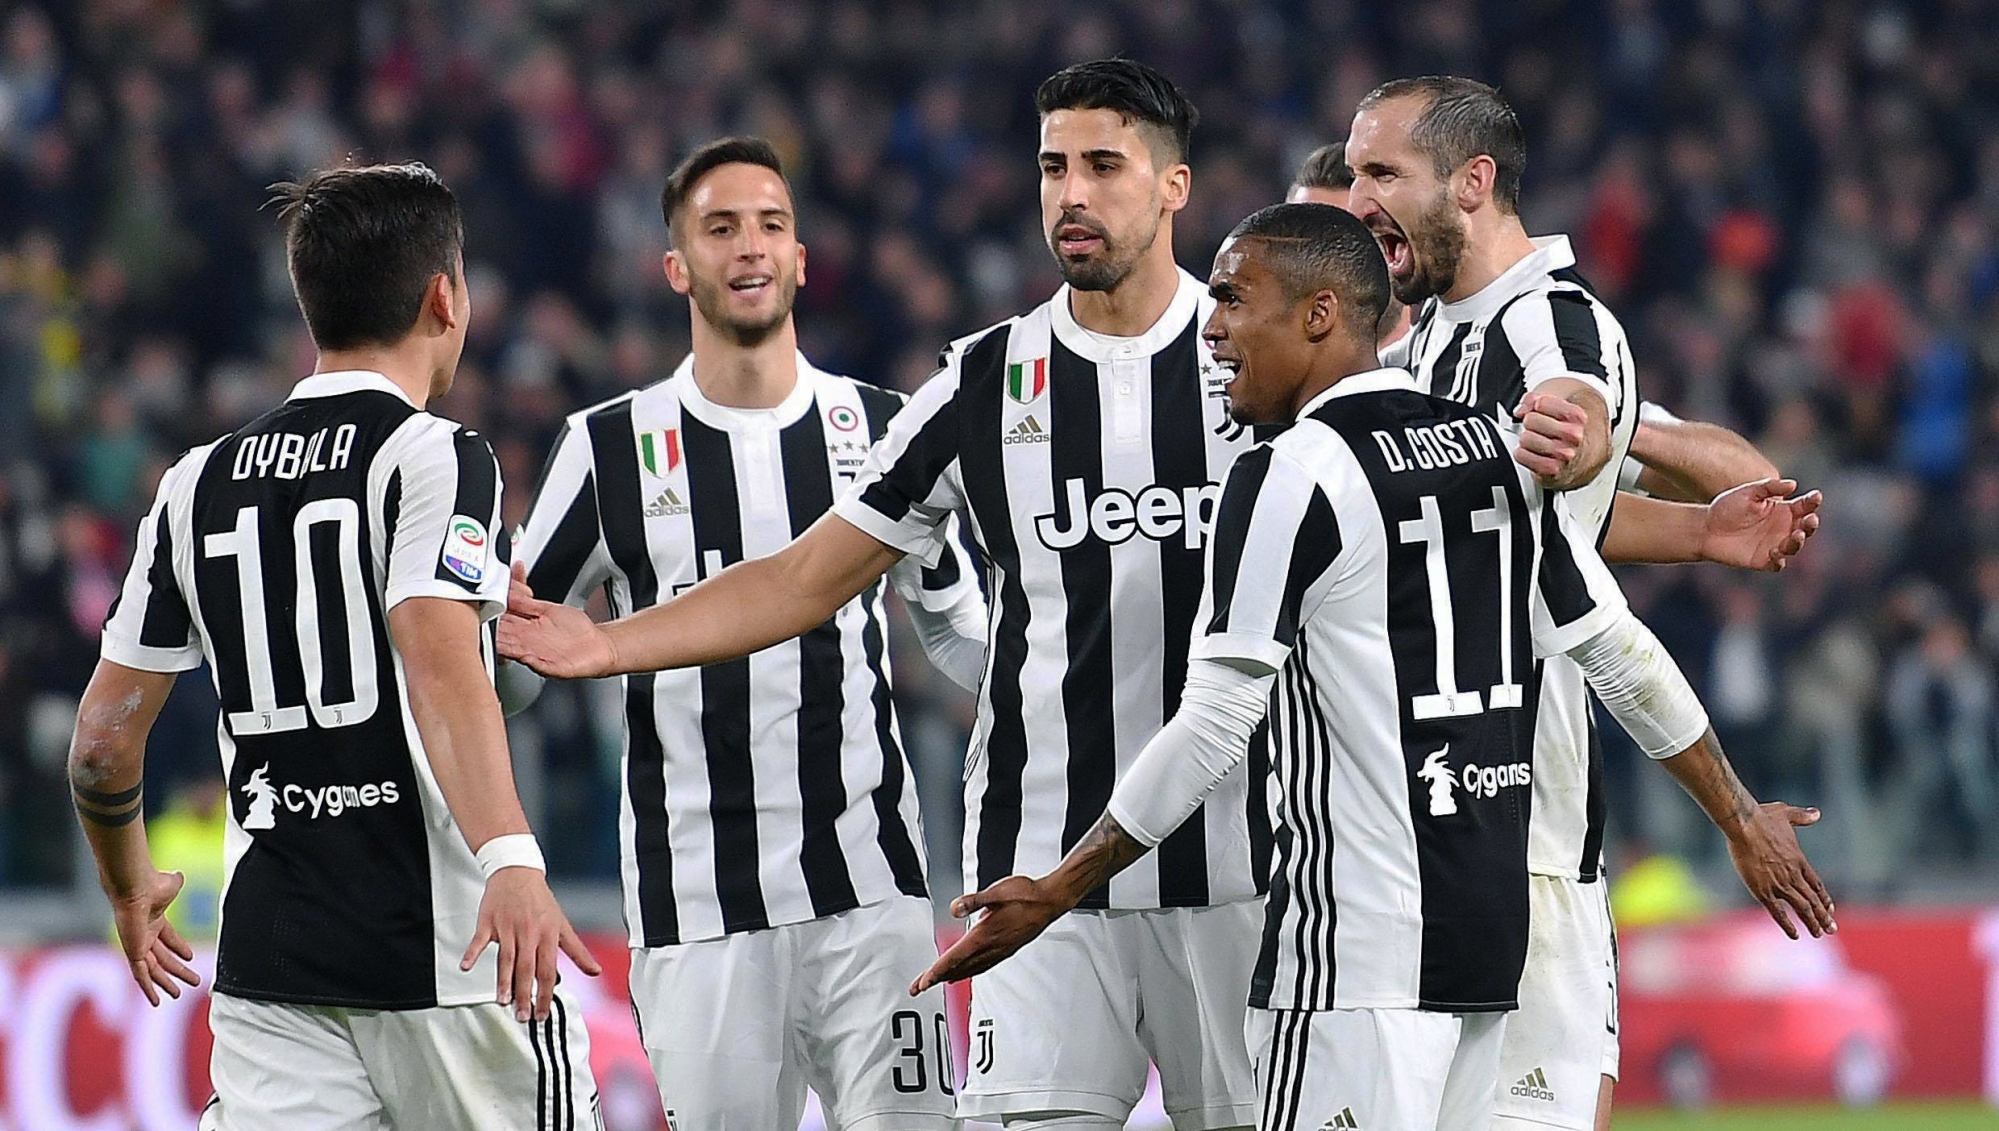 epa06639634 Juventus Sami Khedira (C) celebrates with teammates after scoring the 3-1 goal during the Italian Serie A soccer match Juventus FC vs AC Milan at Allianz Stadium in Turin, Italy, 31 March 2018.  EPA/ALESSANDRO DI MARCO ITALY SOCCER SERIE A